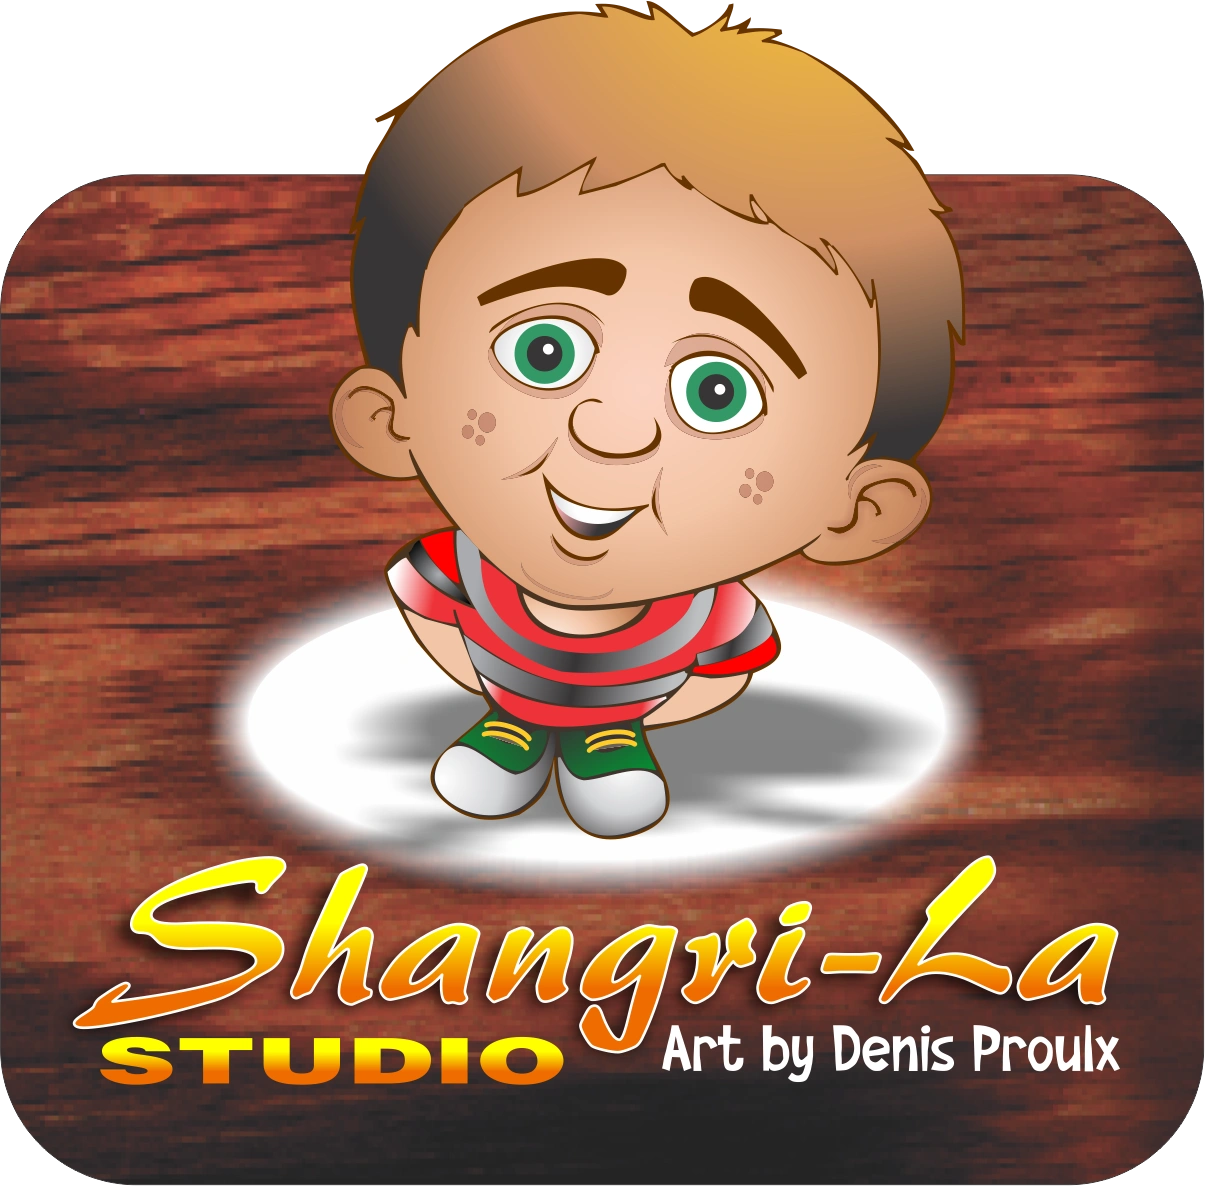 Shangrila Studio Art by Denis Proulx Contact me today.